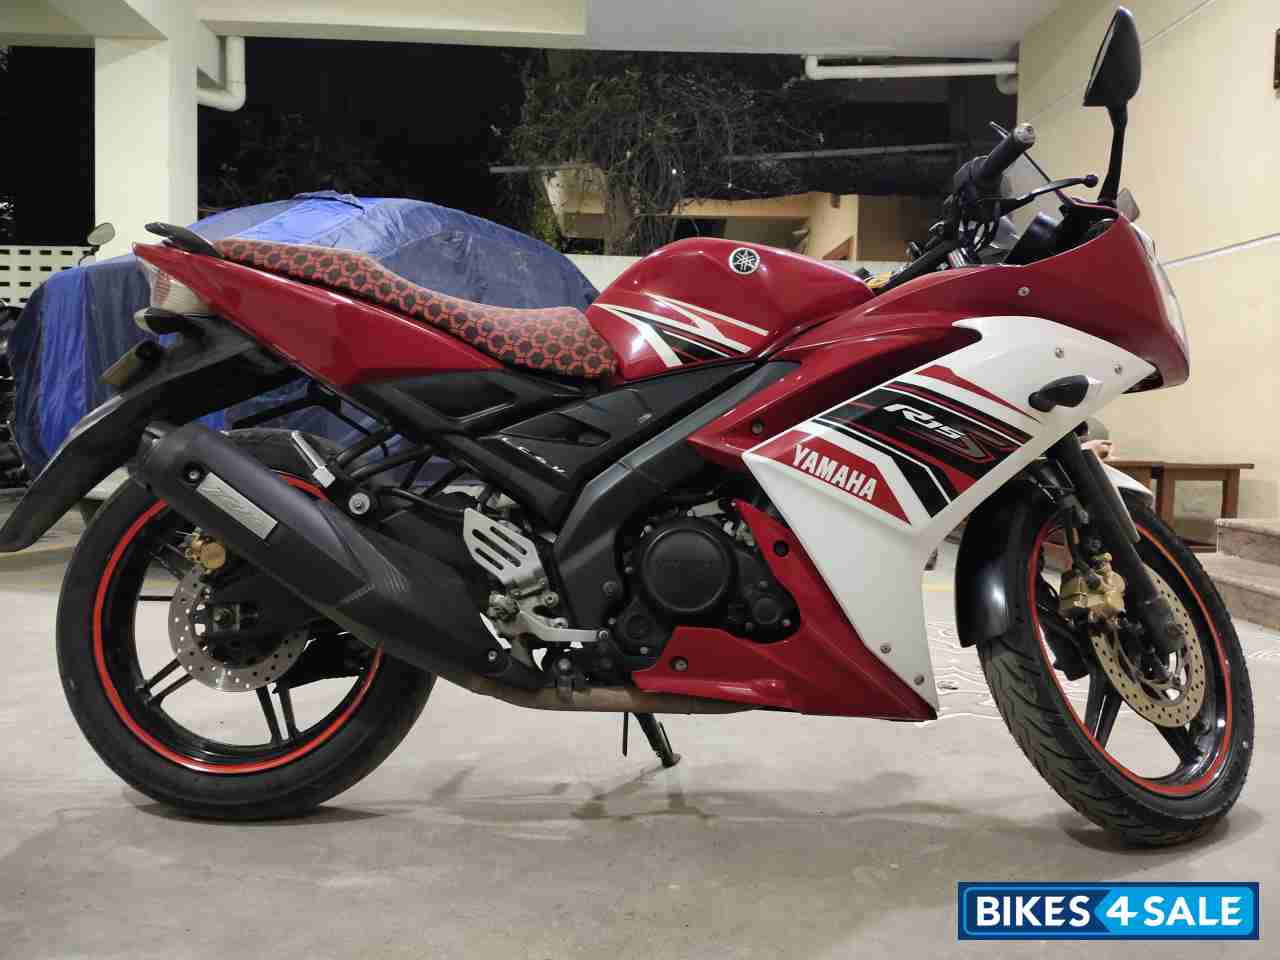 Used 2017 model Yamaha YZF R15 S for sale in Chennai. ID 316925. Red ...